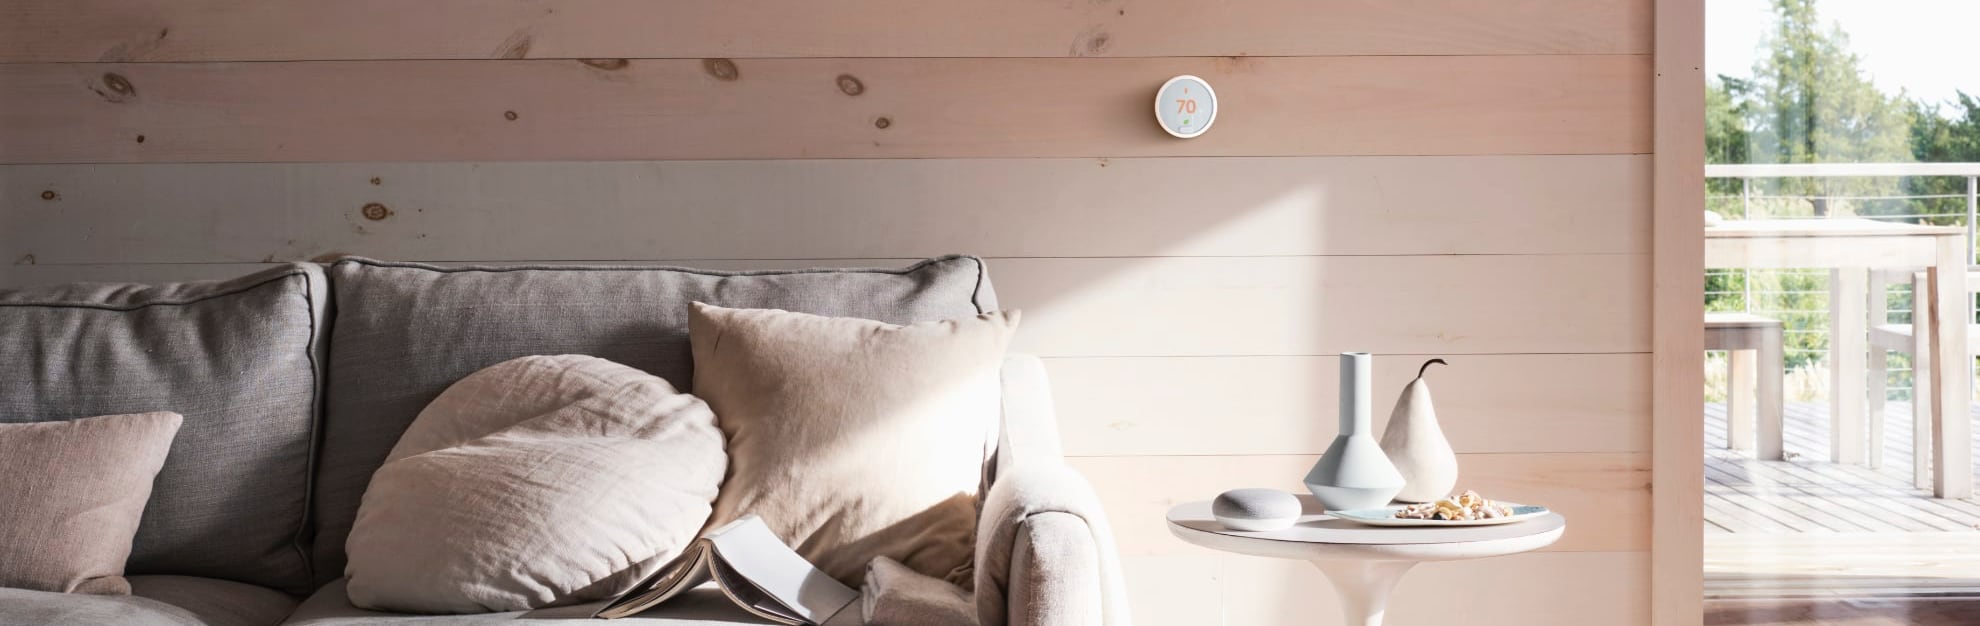 Vivint Home Automation in Houston